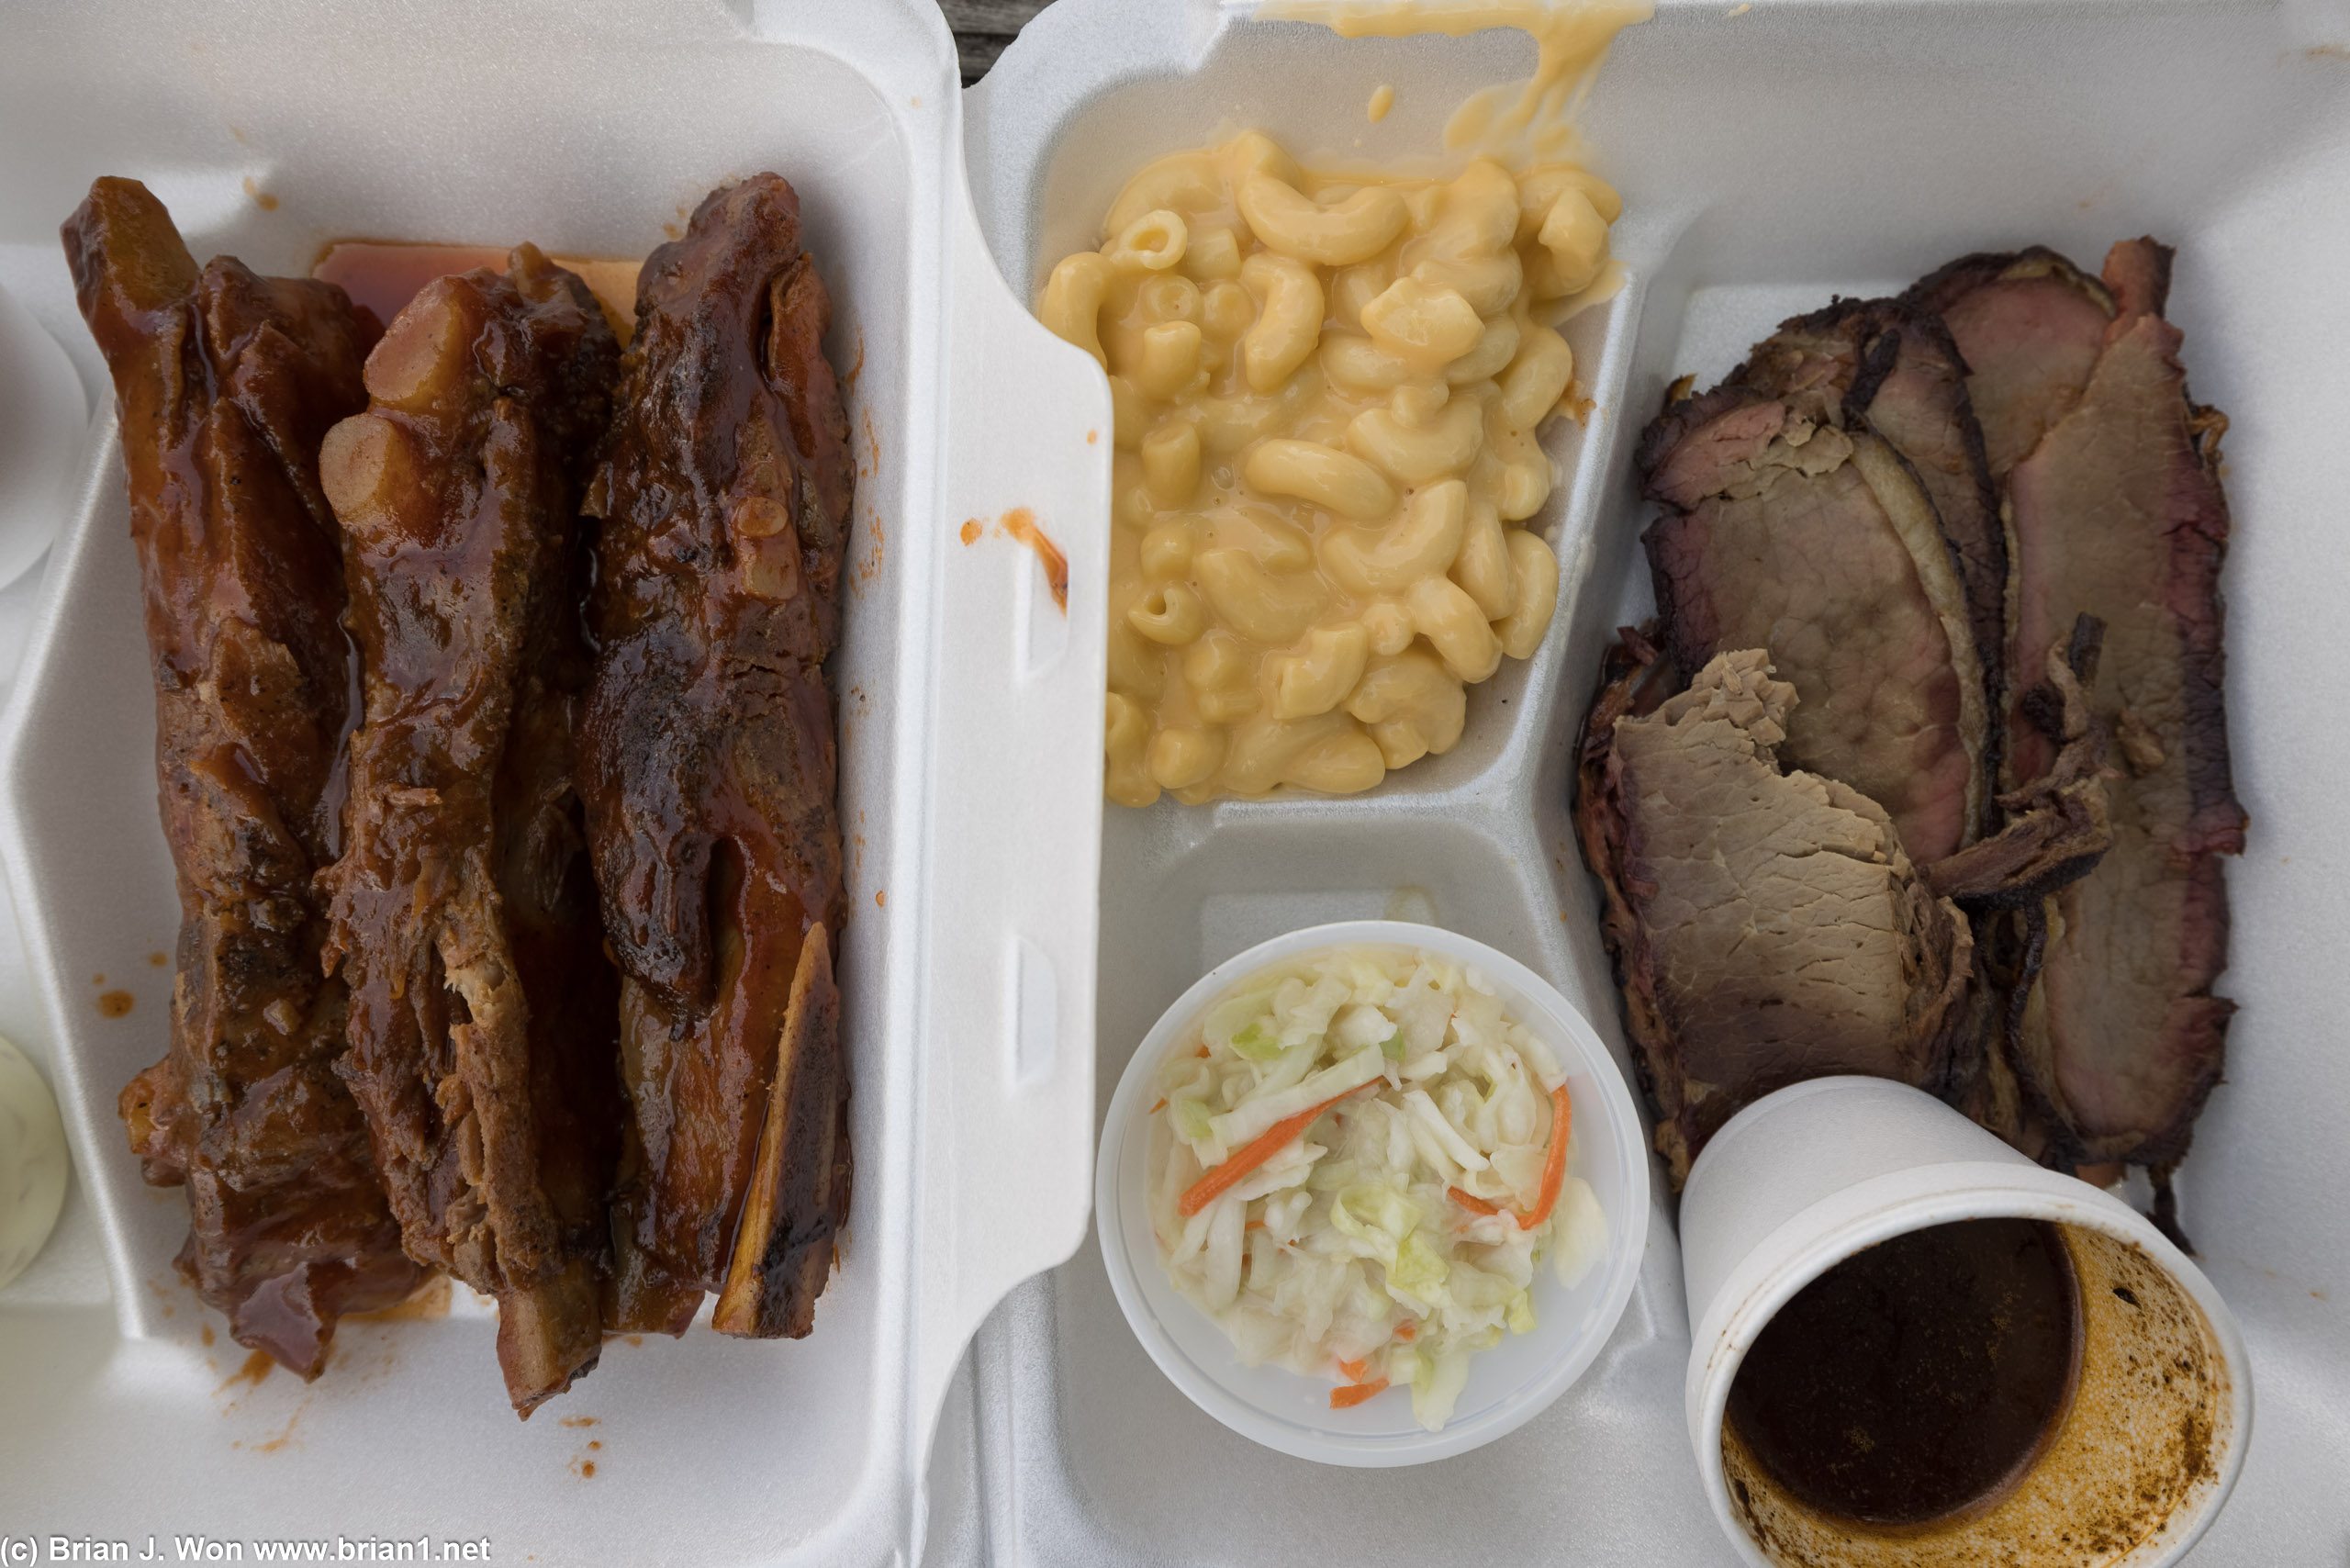 Pork ribs were okay. Plenty decent. The brisket was dry and terrible. Sides were ordinary.